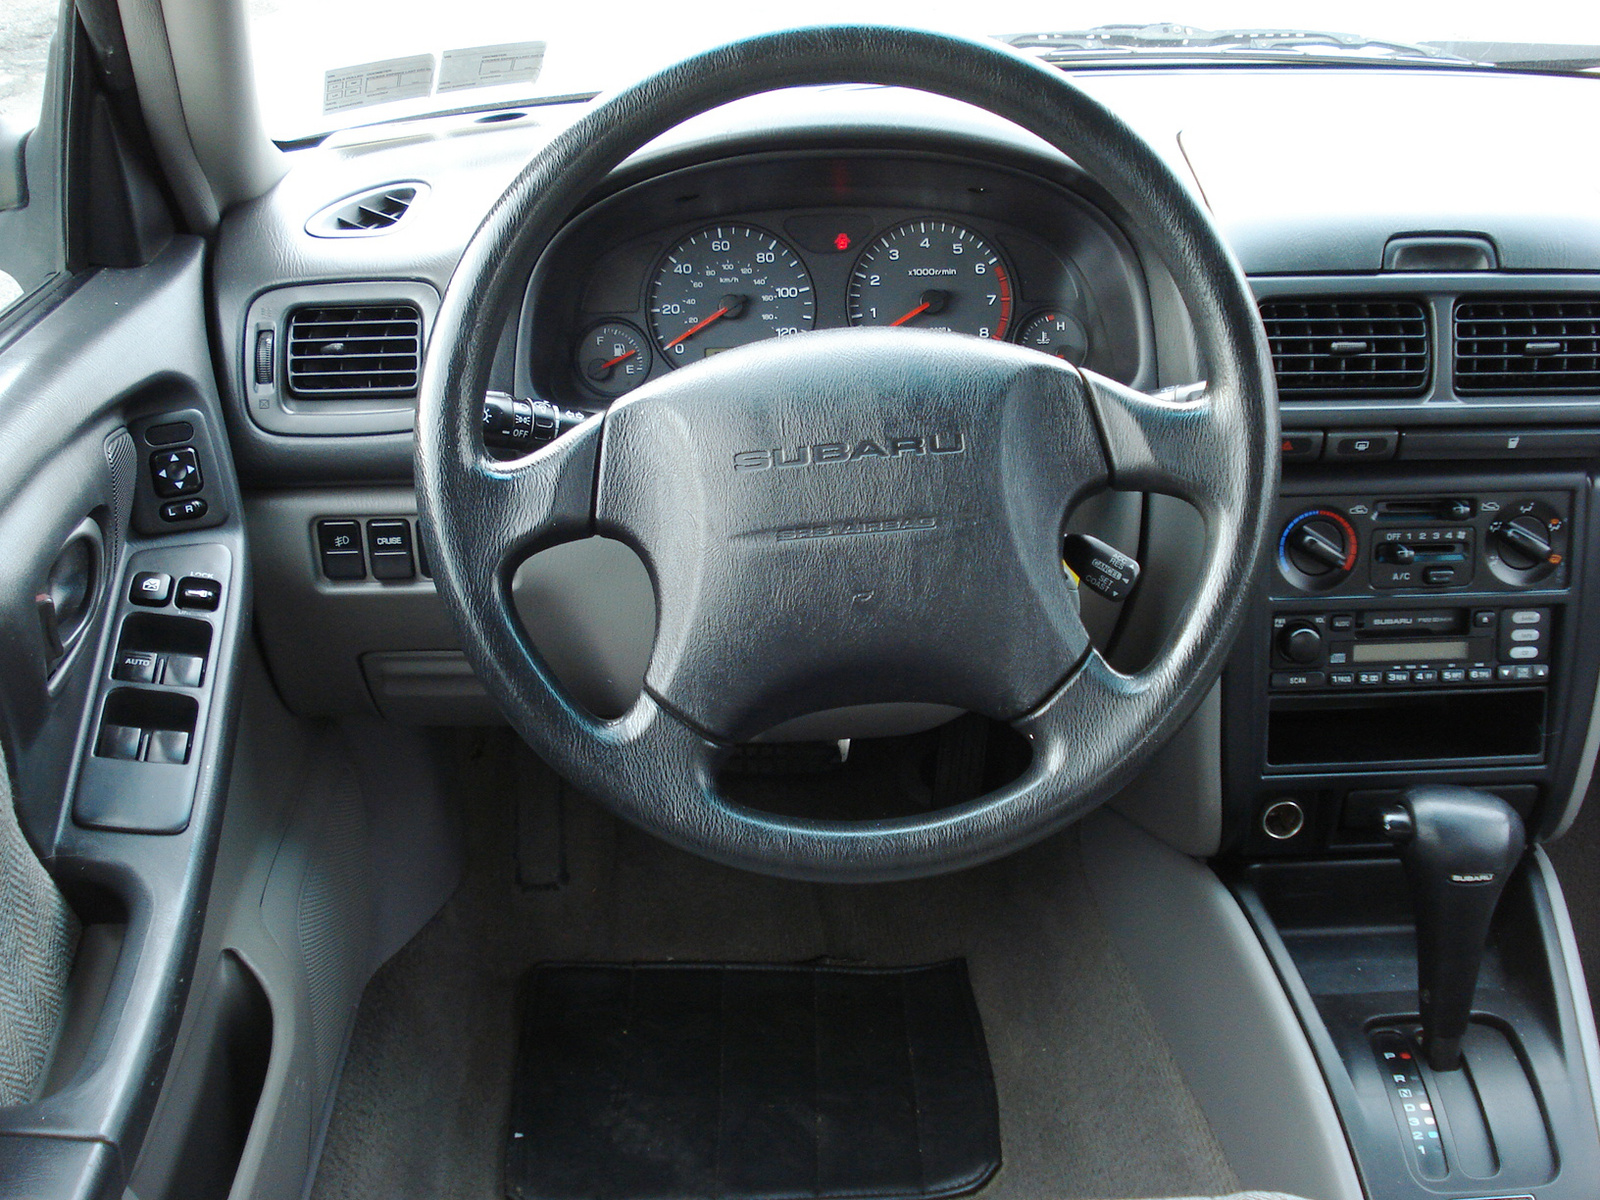 2002 forester front and back interior doors handles the same